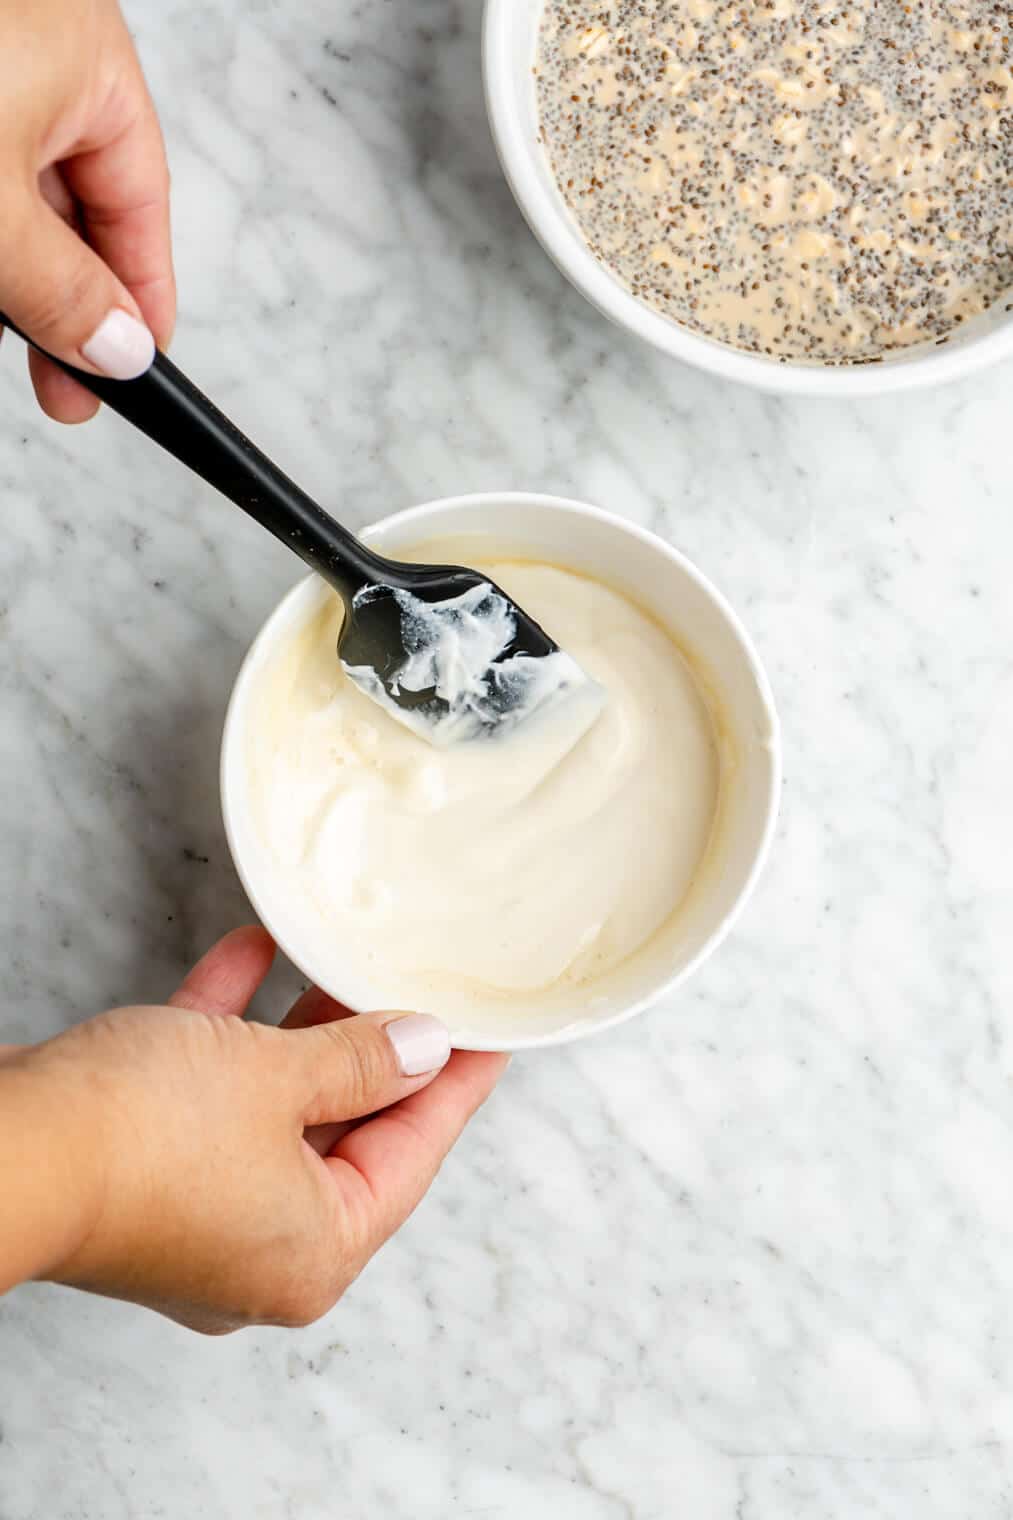 Hand using a black spatula to stir yogurt and maple syrup together in a small white bowl.